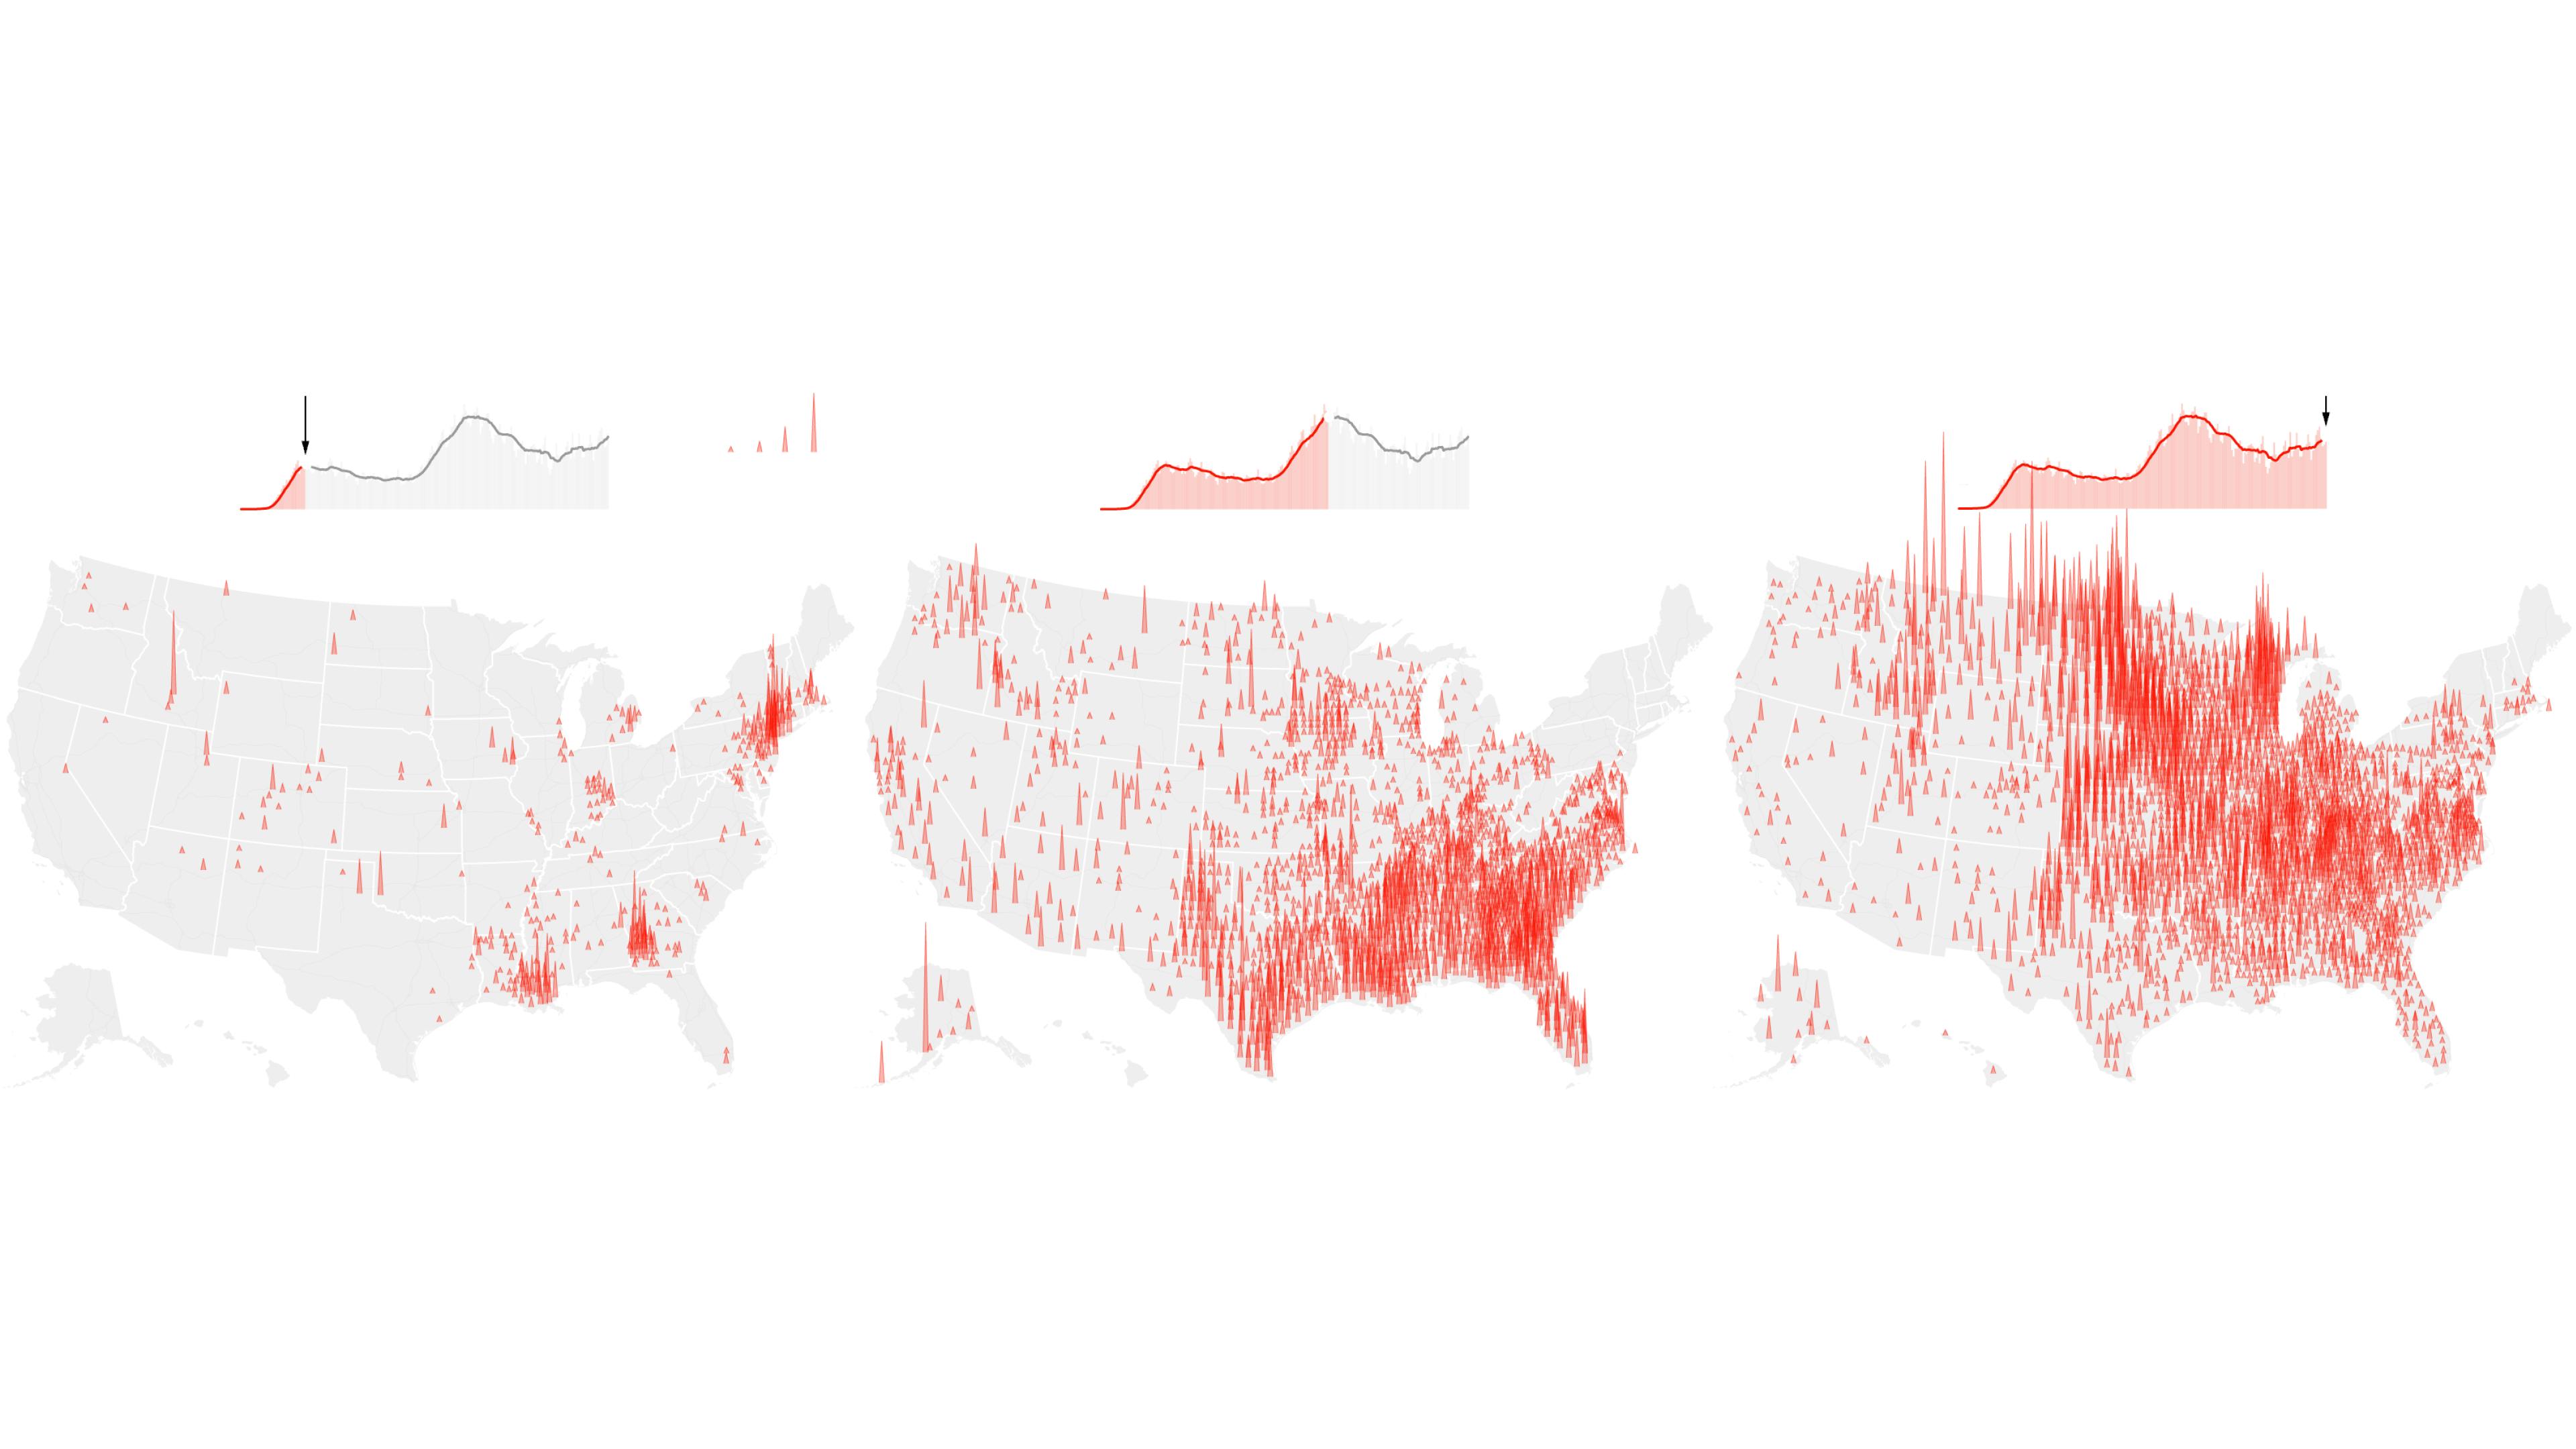 Three maps of the US. Red triangles show the location of Coronavirus infections, with their height showing the scale